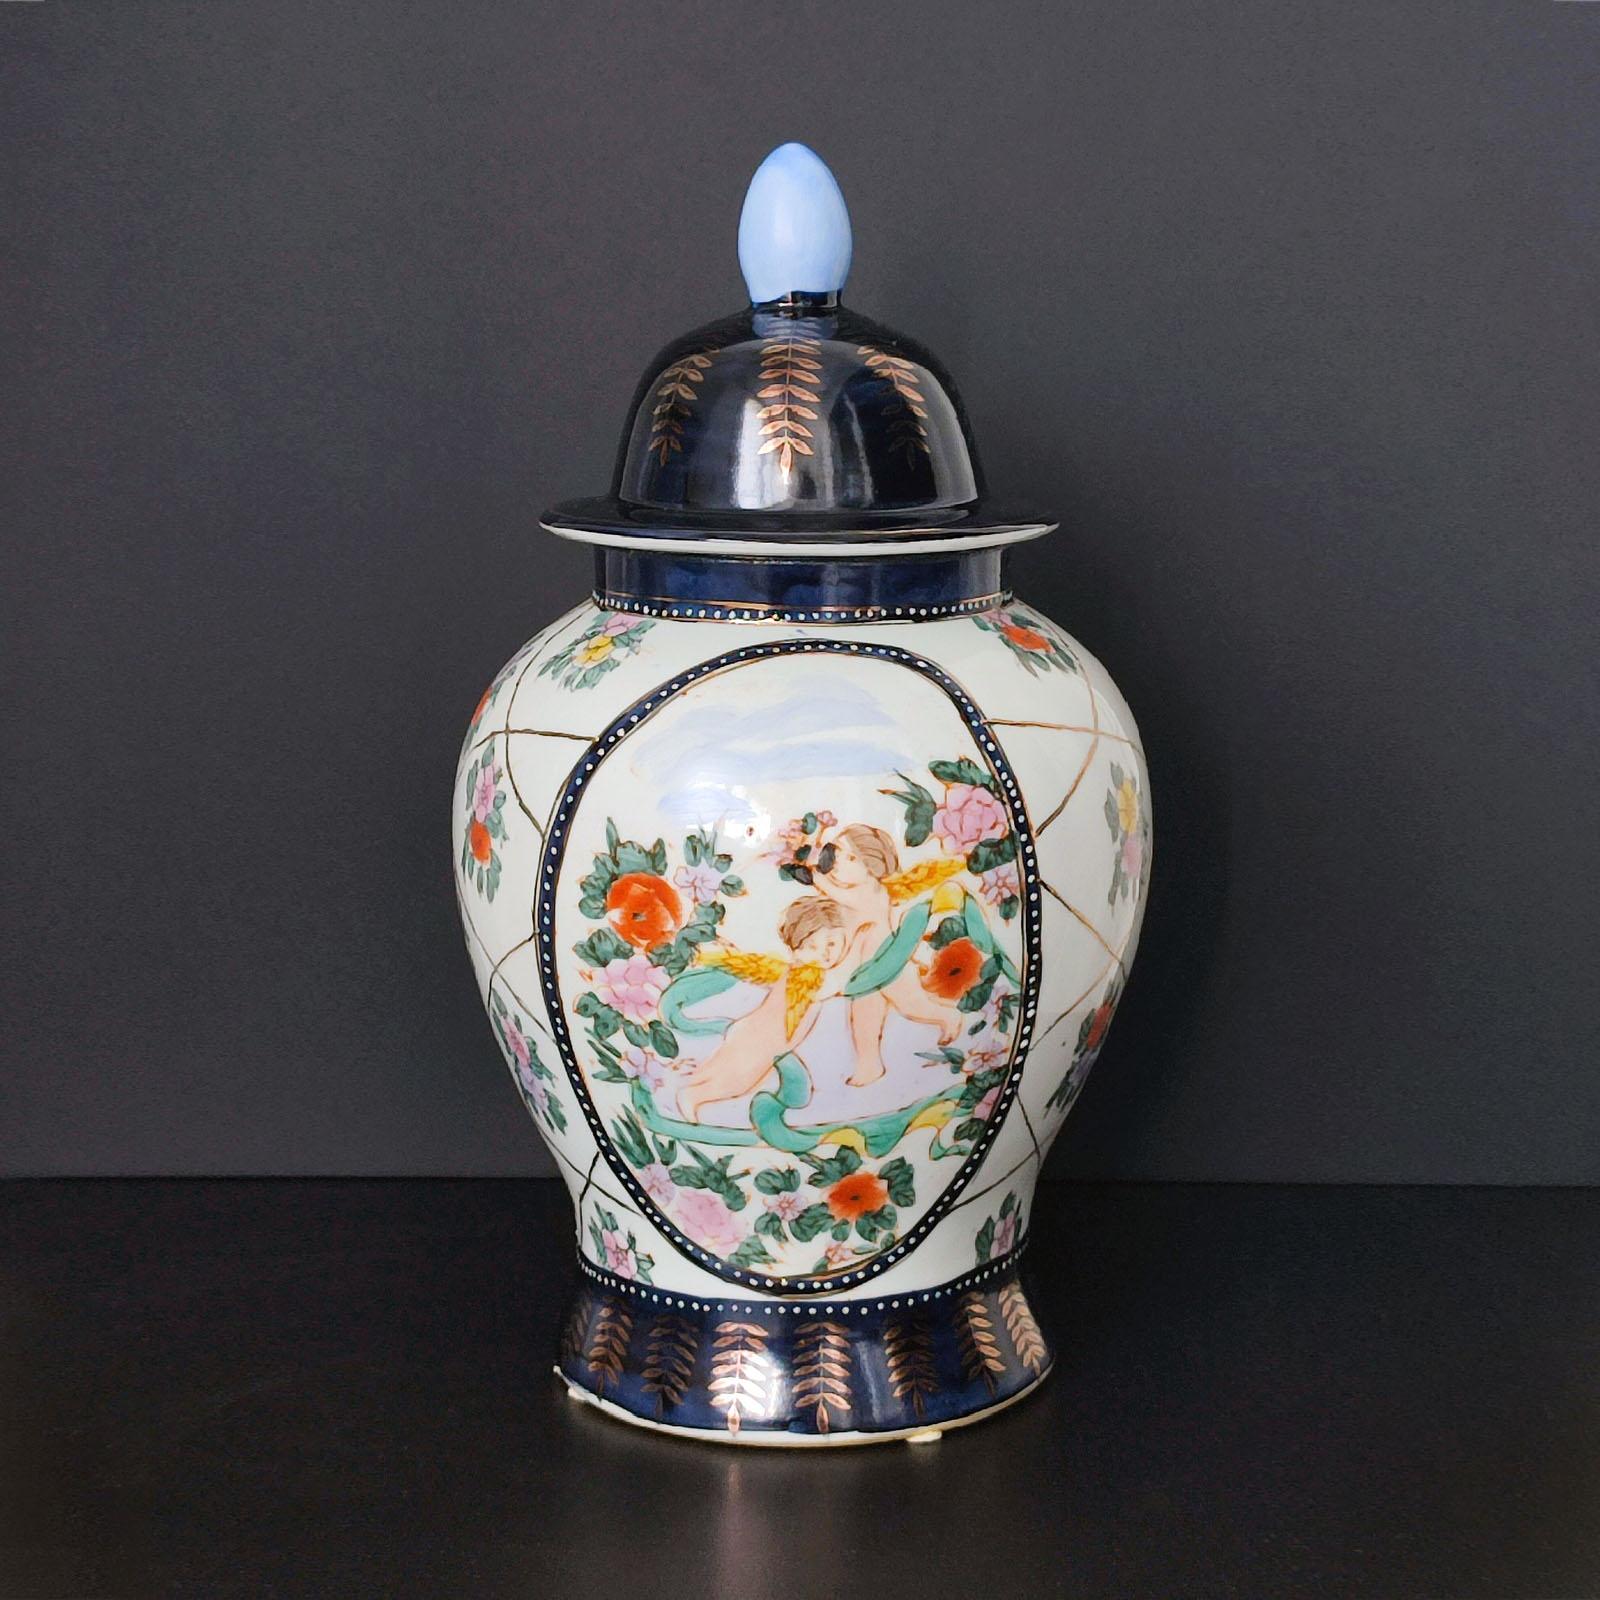 Large Chinese Cupid Lidded Jar
Enameled jar of very good large size and in lovely condition.
Vibrantly enameled overall with cupids, flowers, and foliage decor.
Height 37 cm
Good used condition, normal wear.